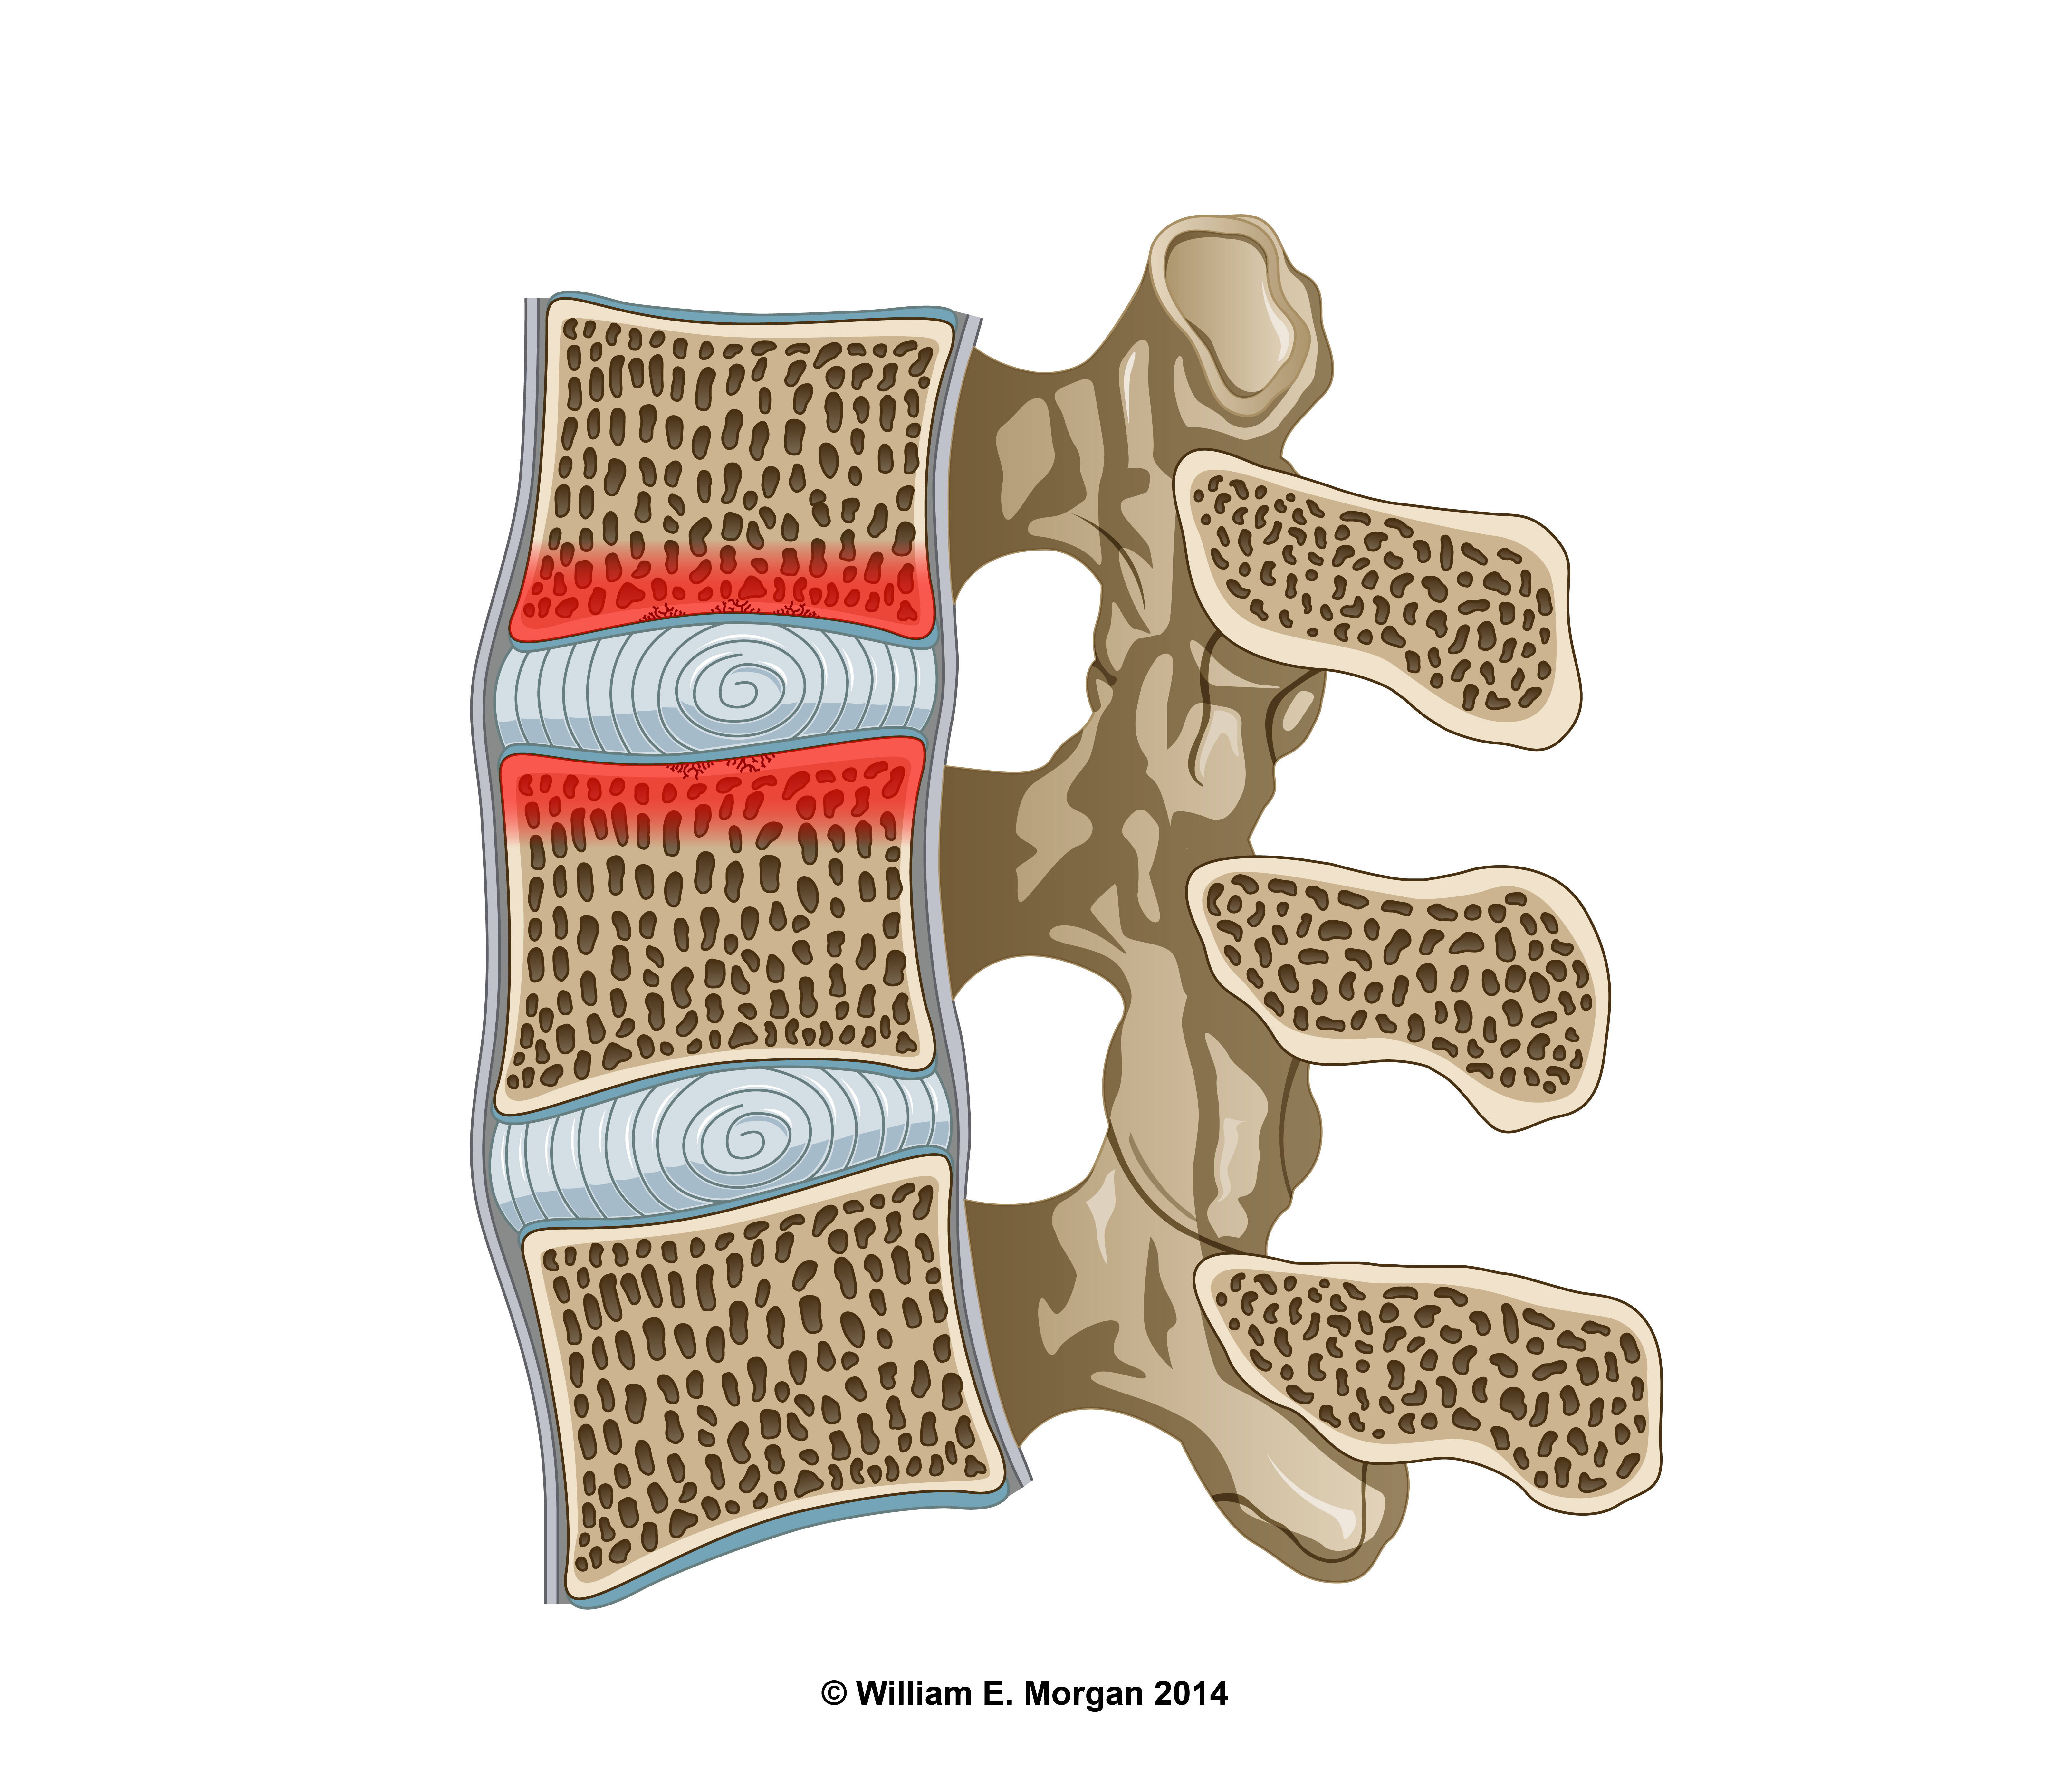 Bony edema (red) extending into the spongy subcortical bone. 